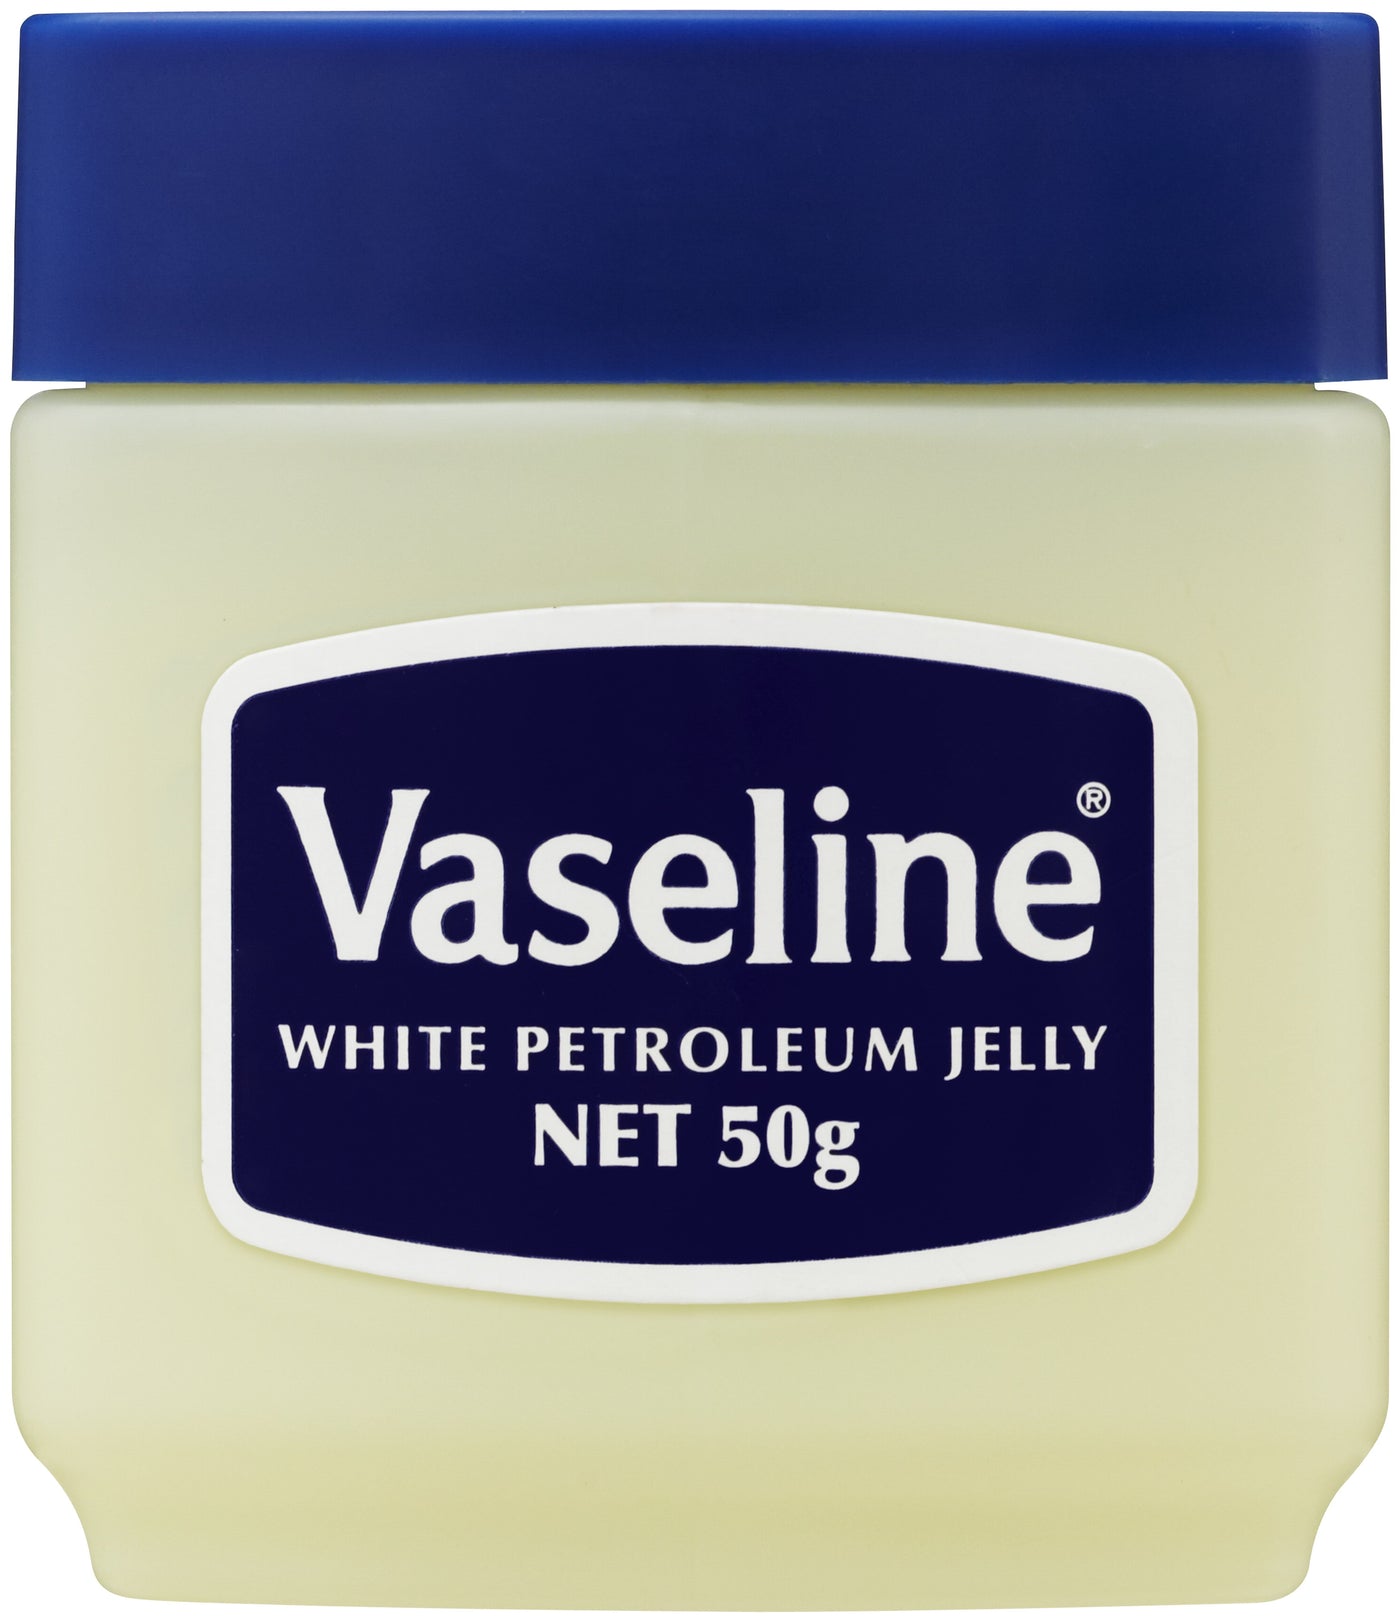 50G Dry Skin Chapped Lips hands and feet Pure Vaseline Petroleum